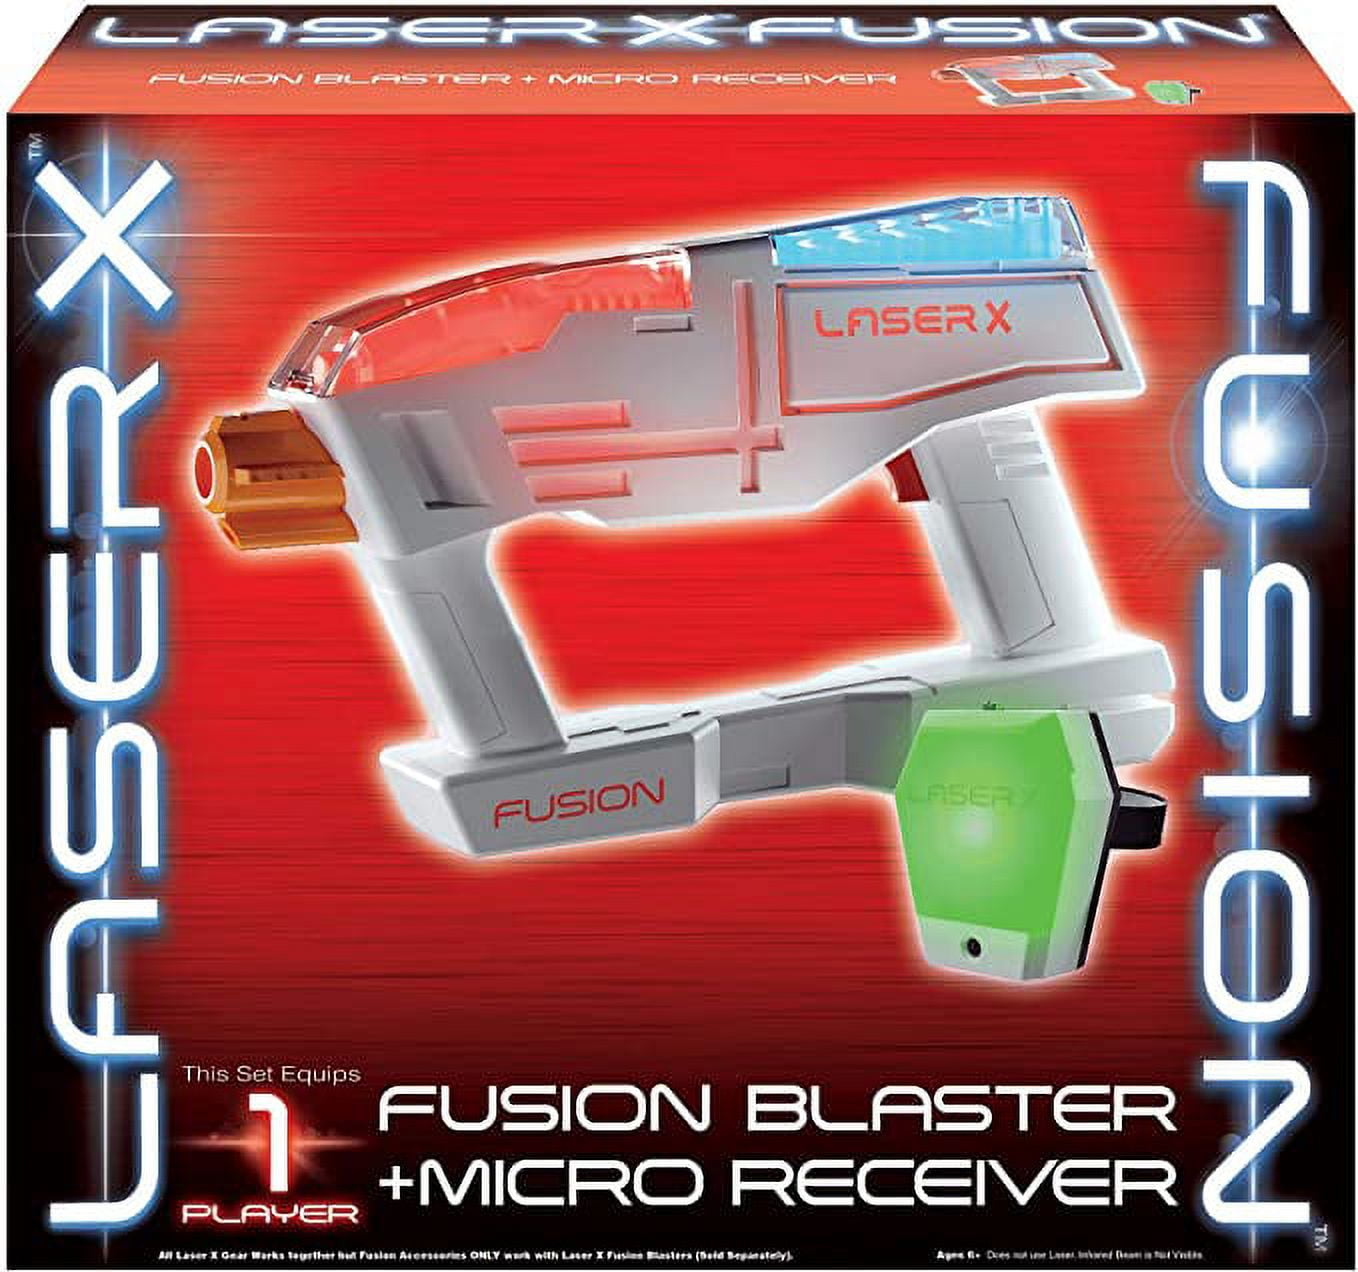 Laser X 2 Pack Entertainment One at or Fun 20 Toy for Pck 30 Blaster x Feet - Home + Receiver, Each - Micro Player Blaster Fusion Range - Wide Outdoor